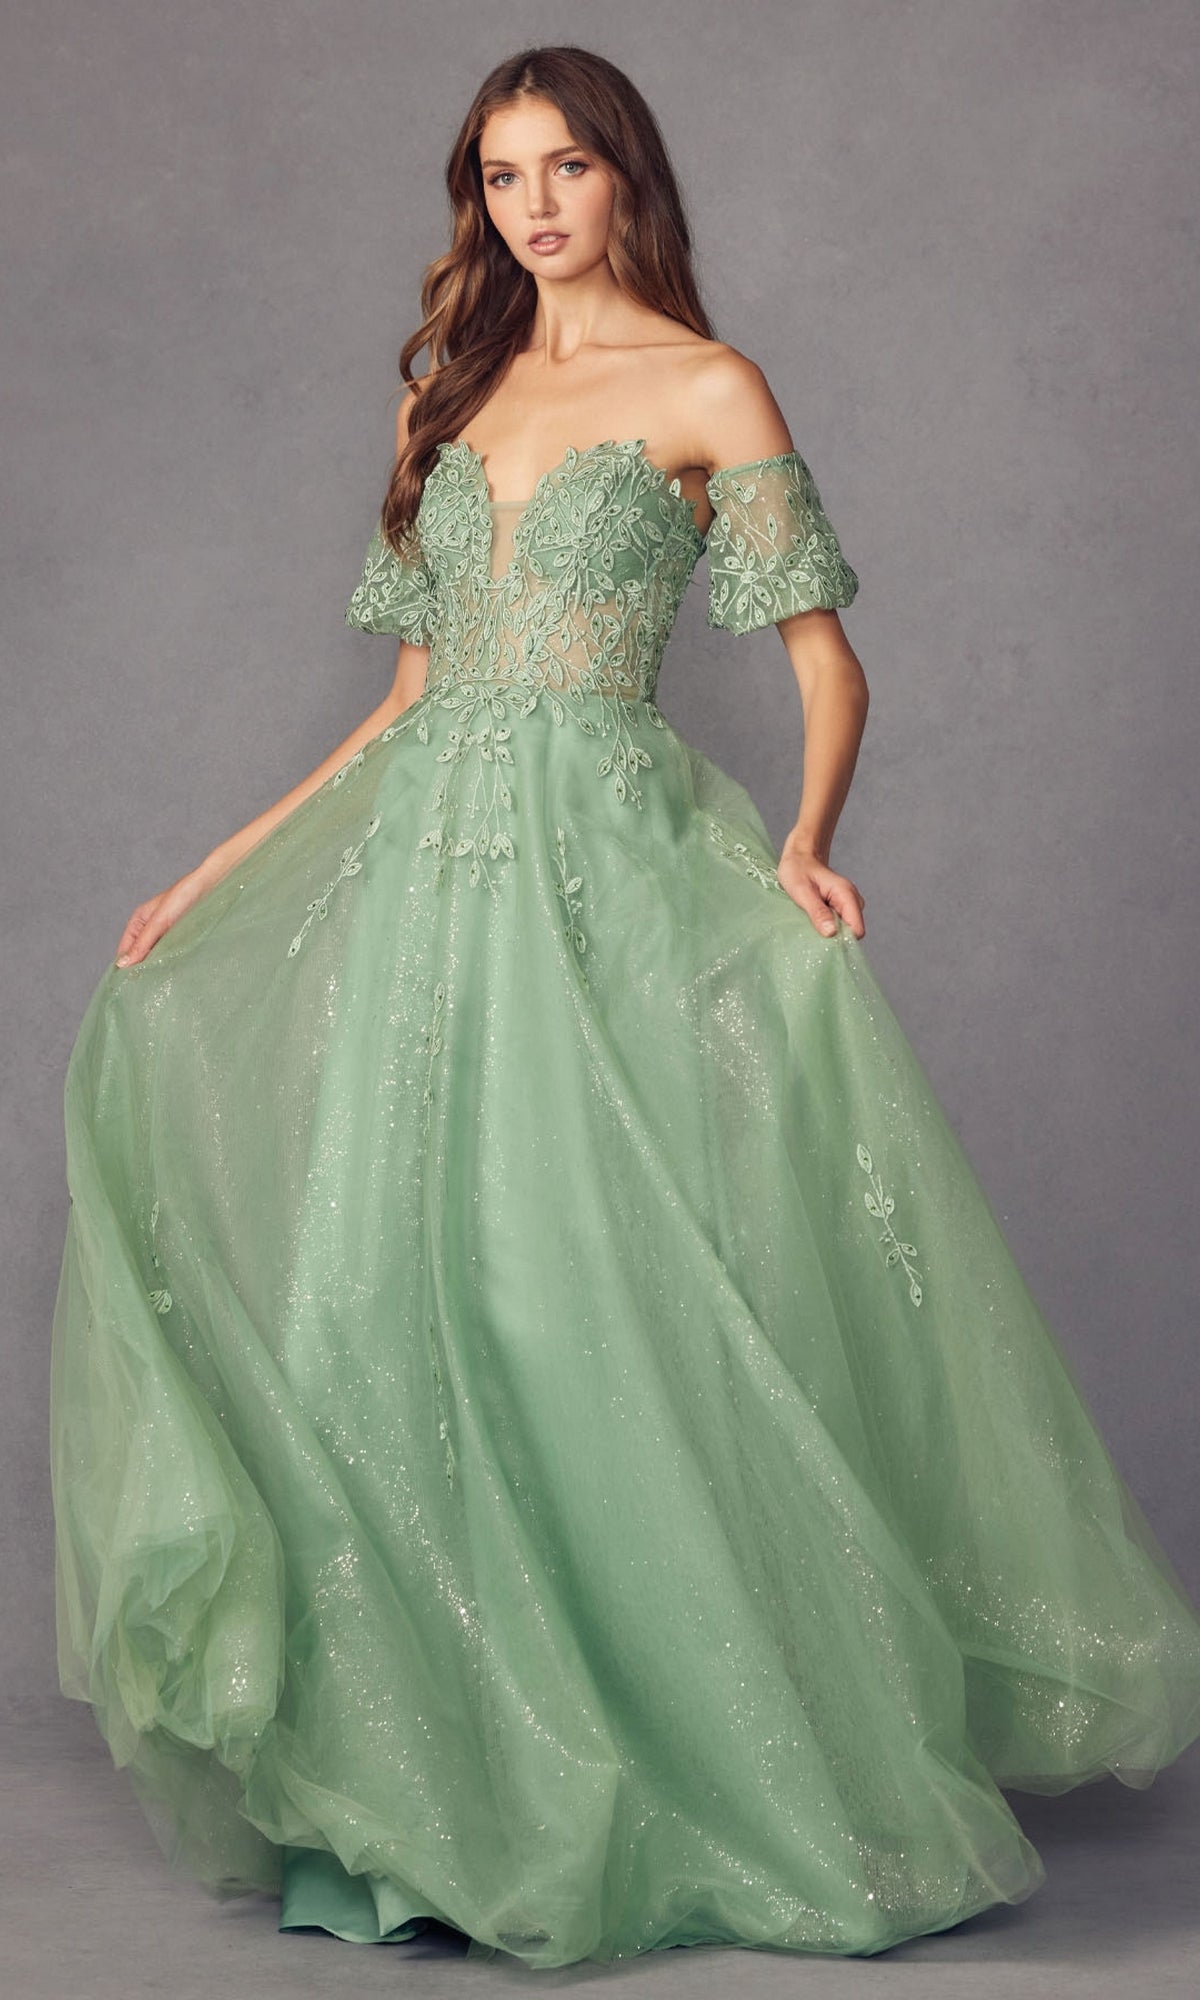 Glitter Prom Dresses with Puff Sleeves - PromGirl